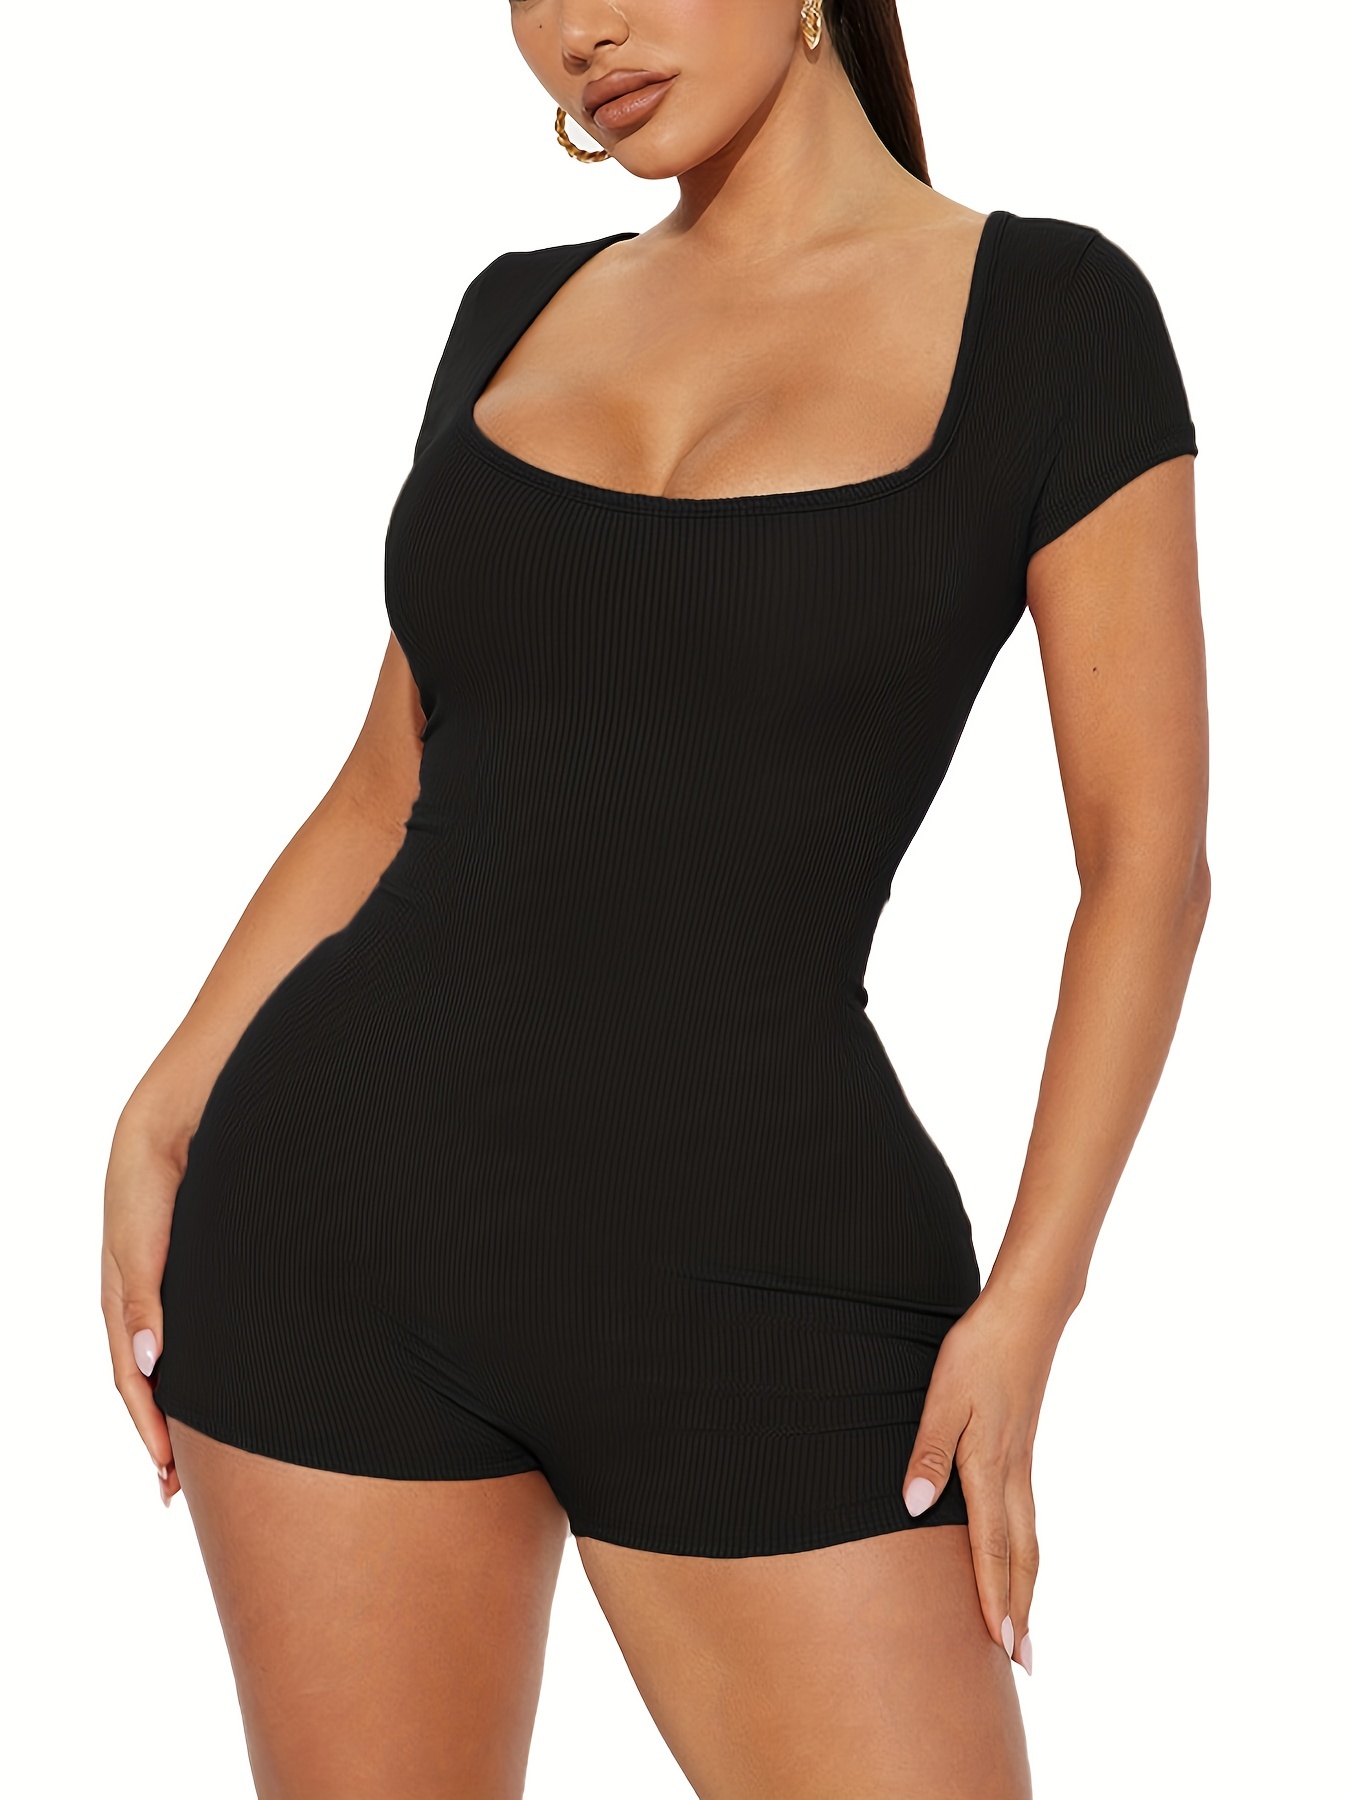 New Arrivals Ladies Skinny Bodycon Solid Color Sexy Women Shorts